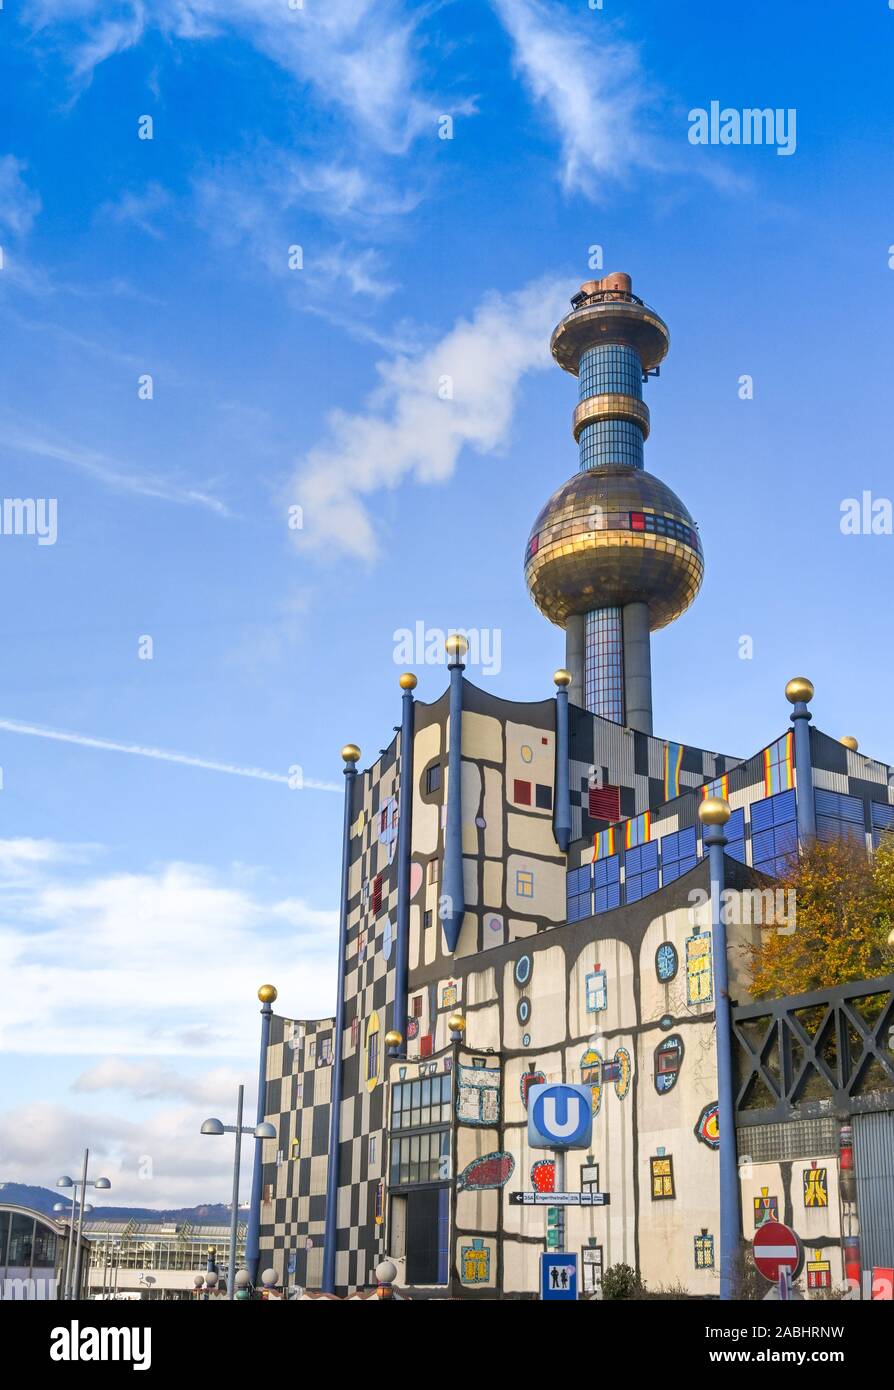 VIENNA, AUSTRIA - NOVEMBER 2019: The distinctive shape and painted exterior of the municipal waste incinerator, a landmark in Spittelau, Vienna Stock Photo